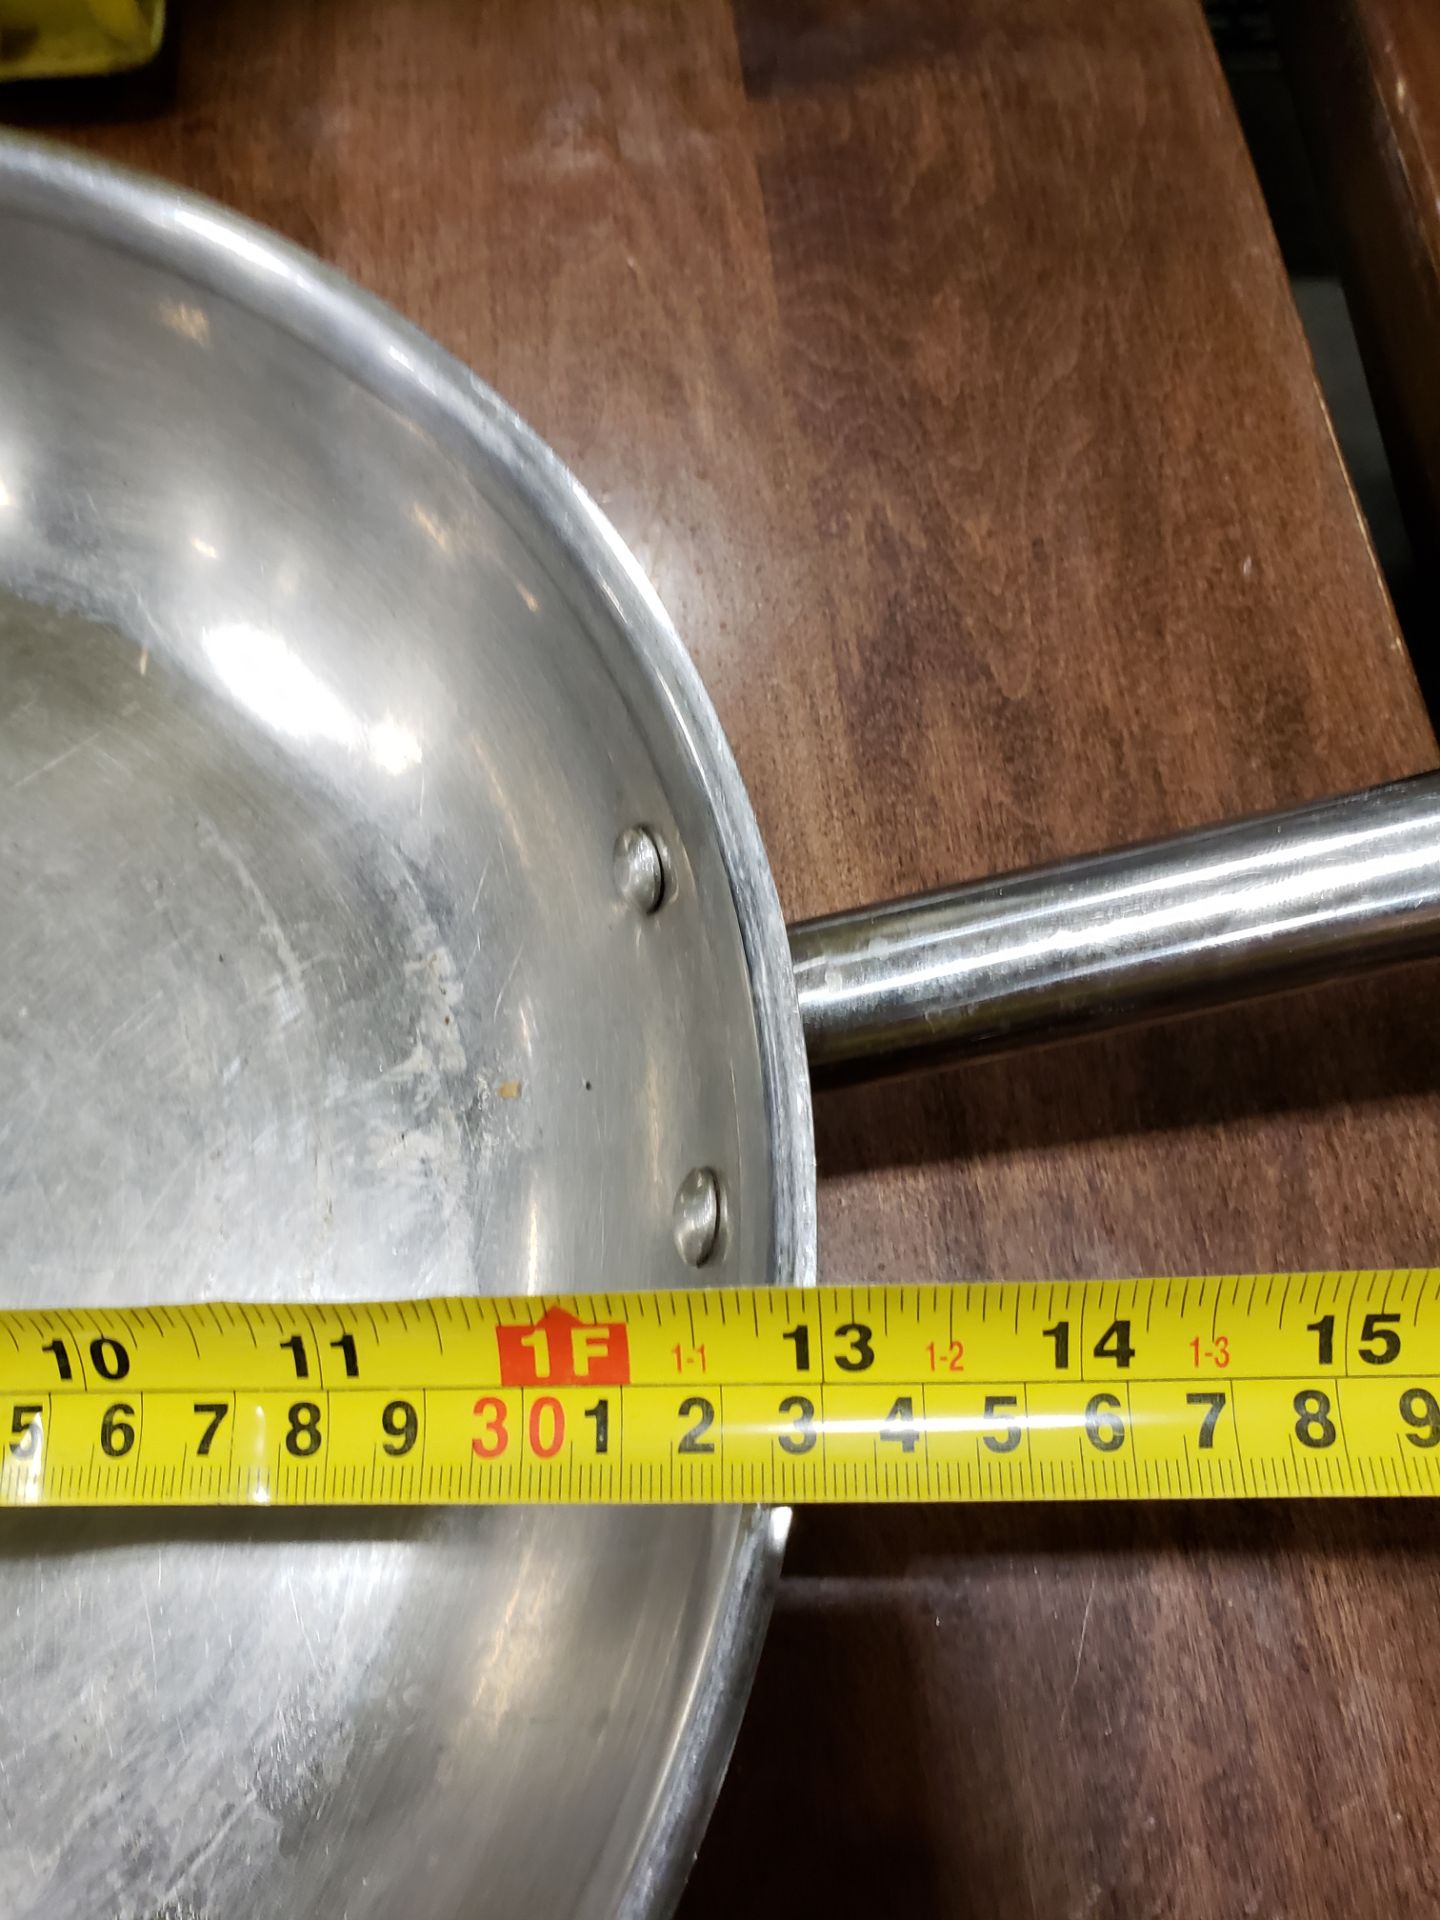 Stainless Steel Fry Pans 1 x 13" & 1 x 10" - Lot of 2 - Image 2 of 5